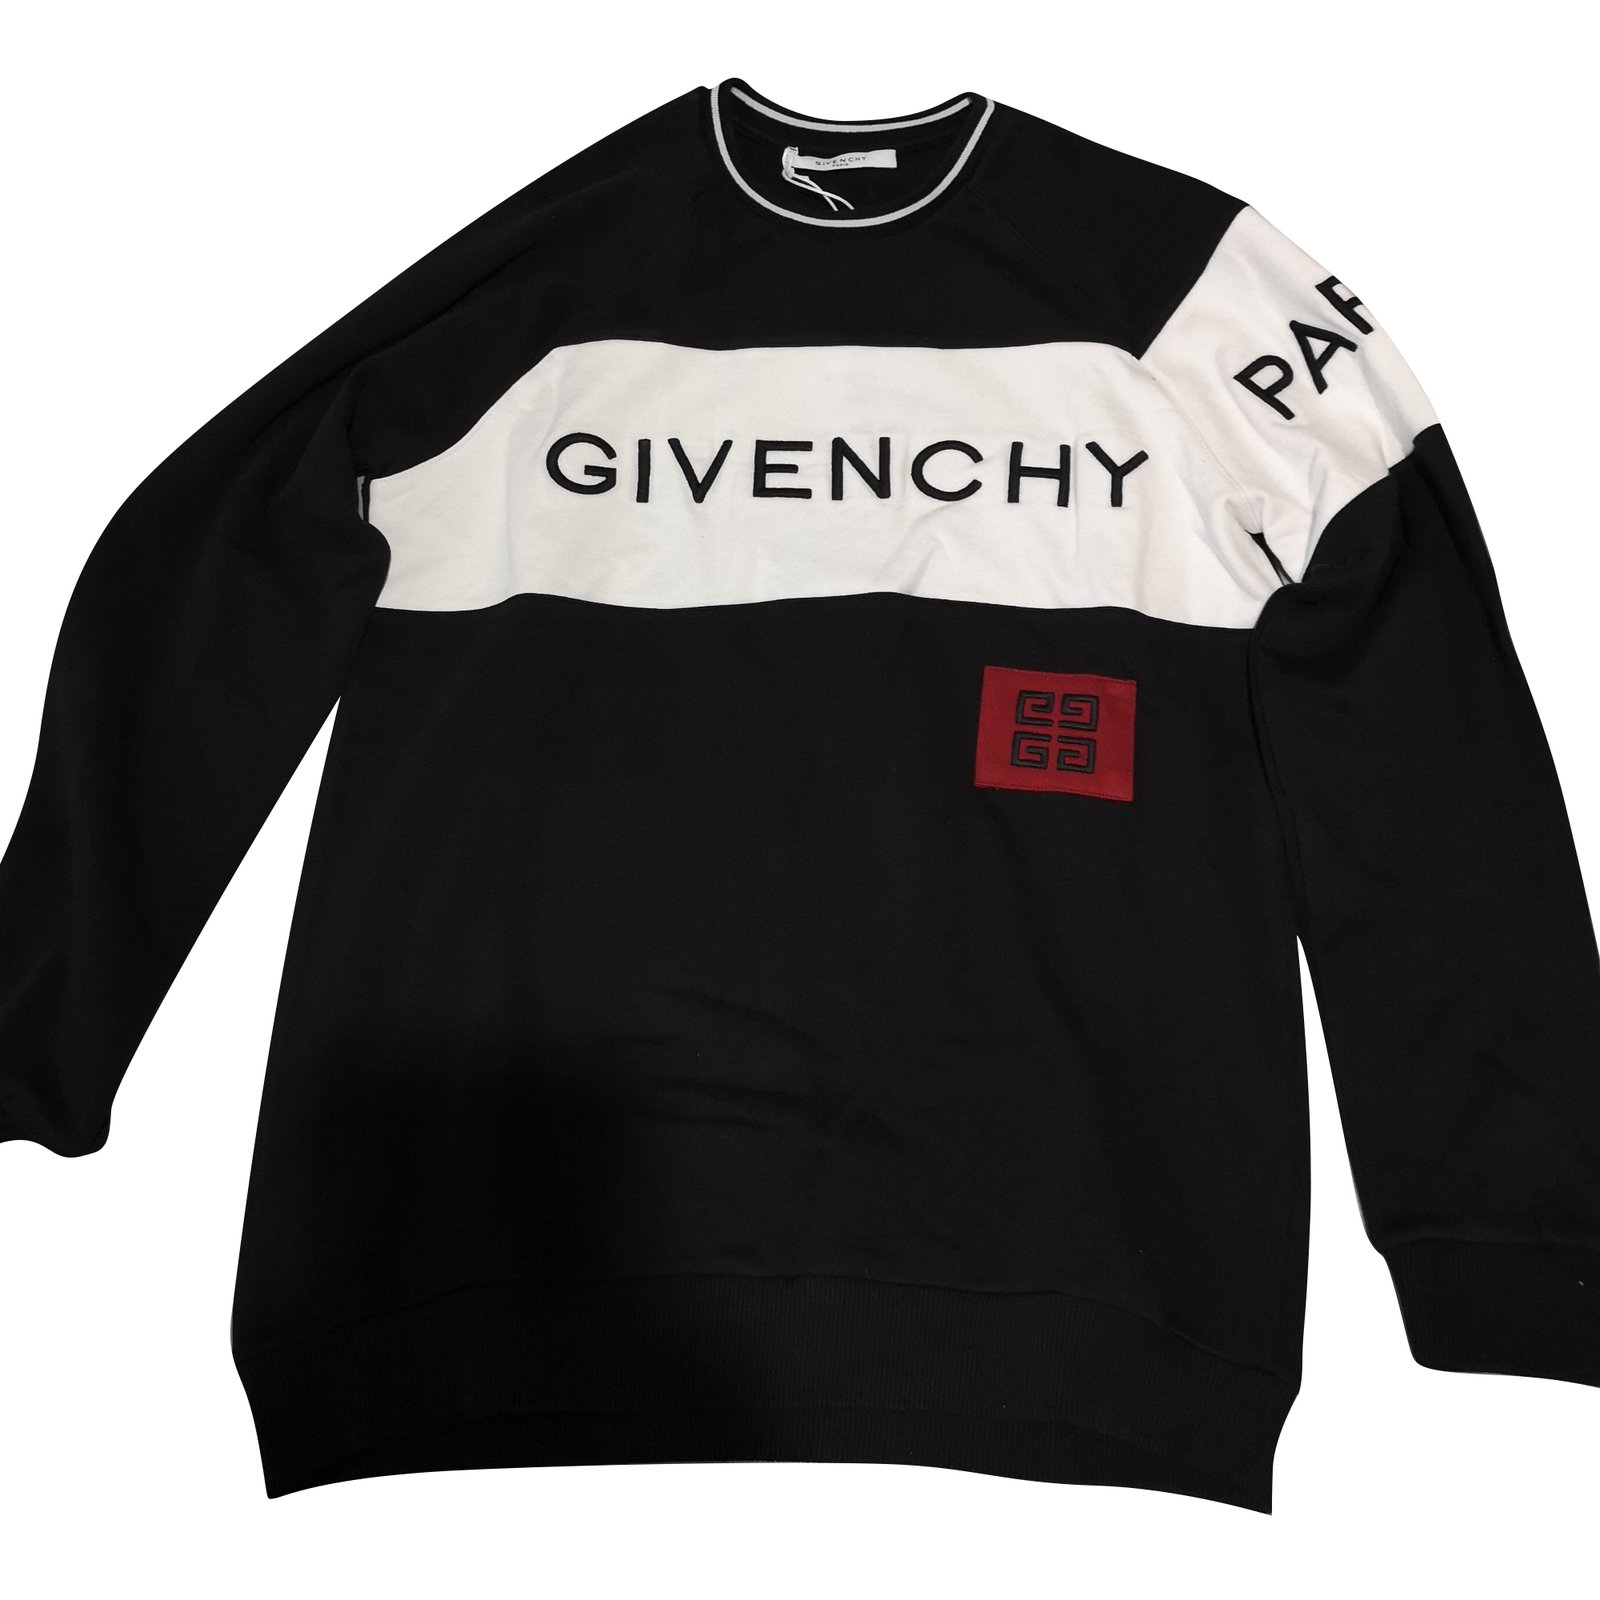 Parity \u003e givenchy sweater, Up to 66% OFF